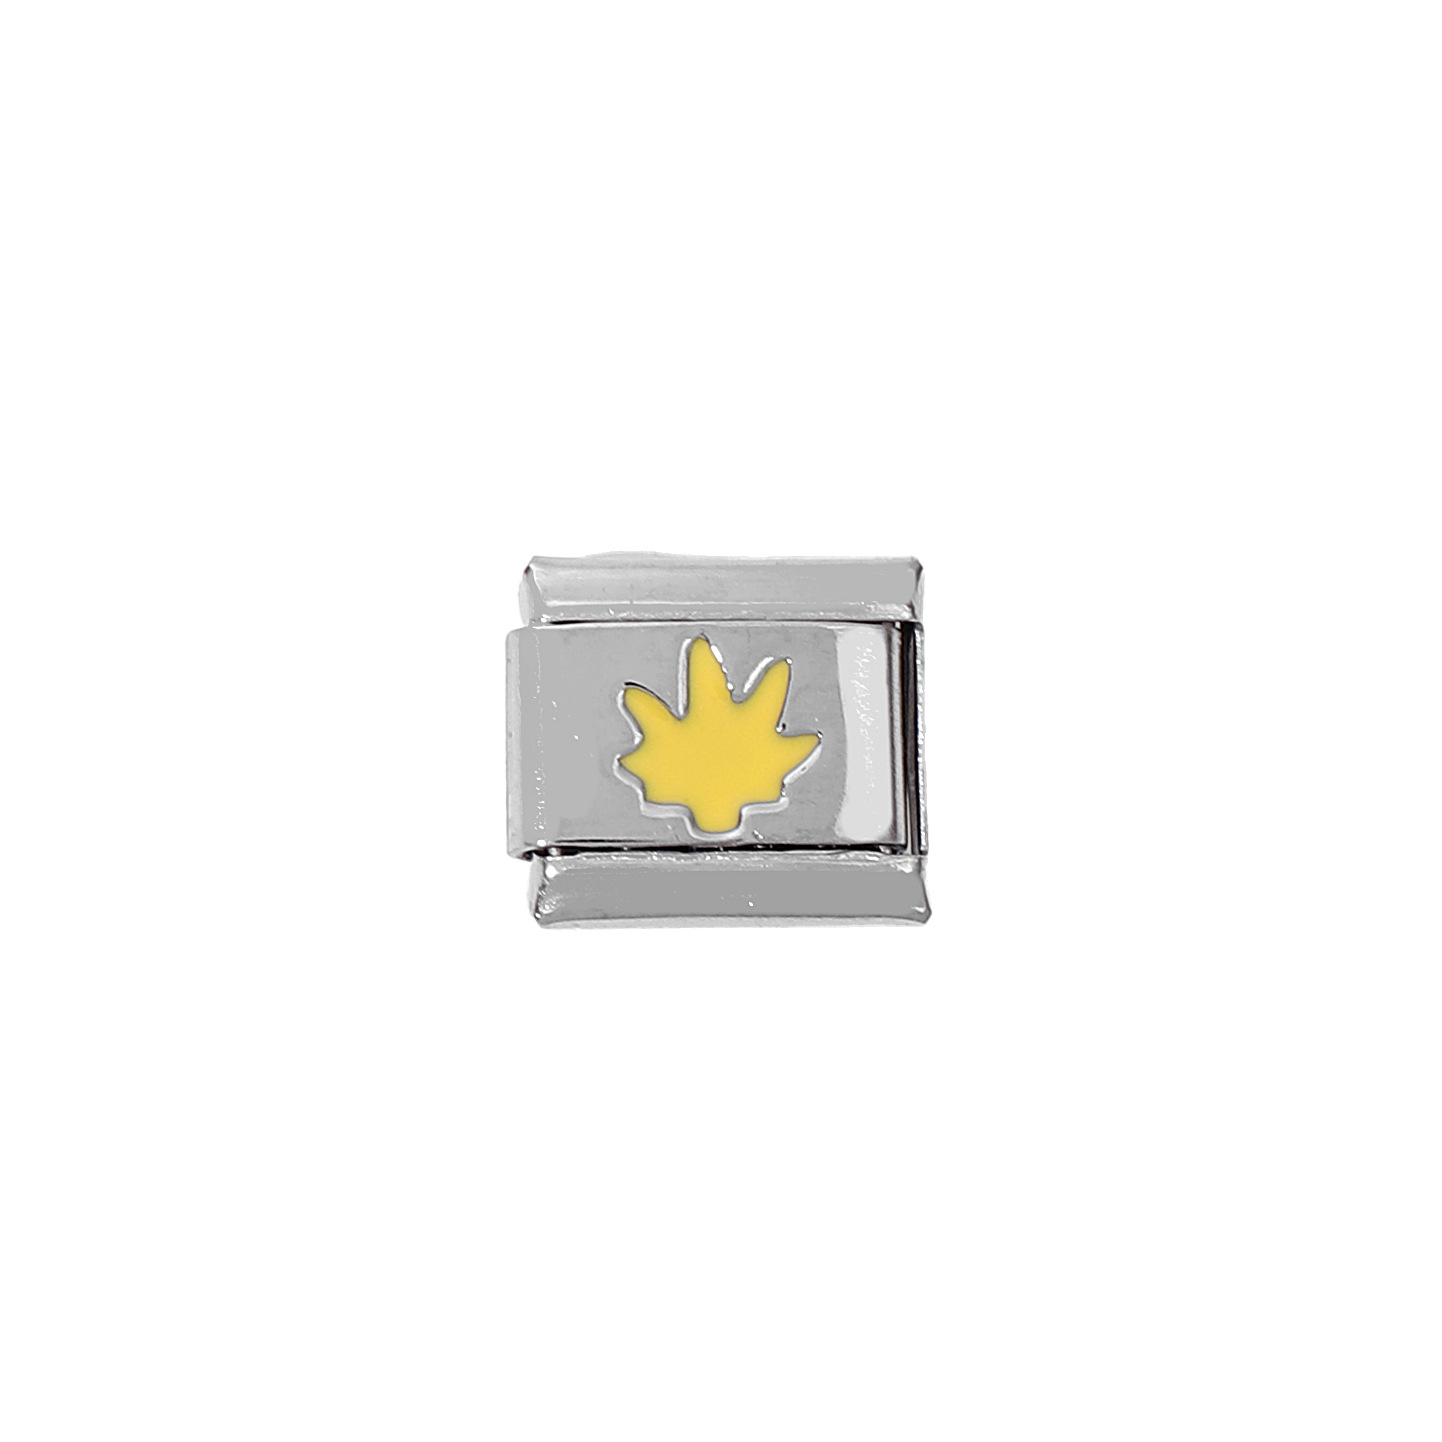 11:0278- Yellow Maple Leaf 1 section